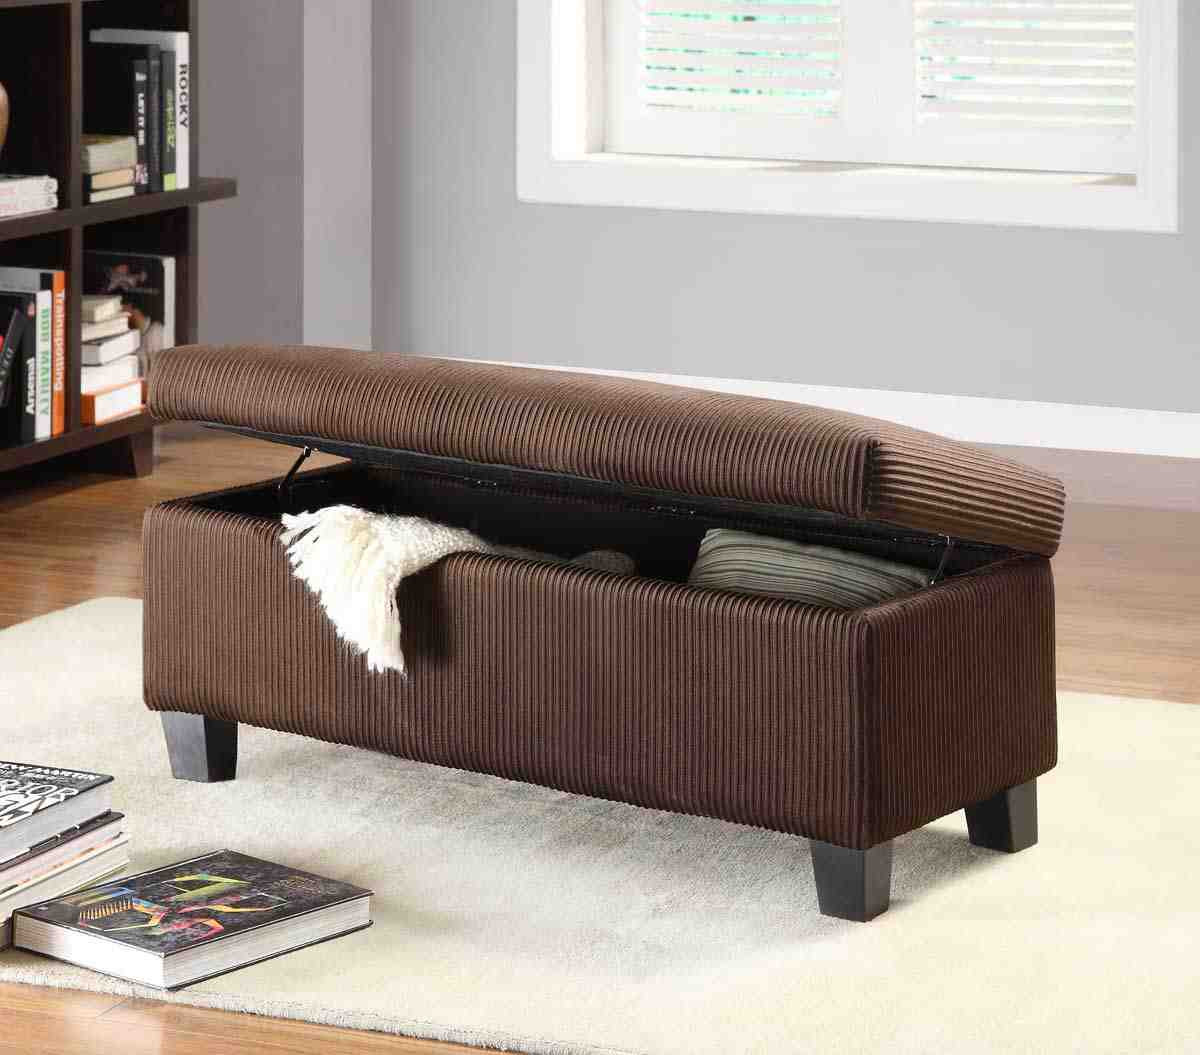 Living Room Bench Ideas
 Storage Ottoman Bench How to Choose for a Living Room